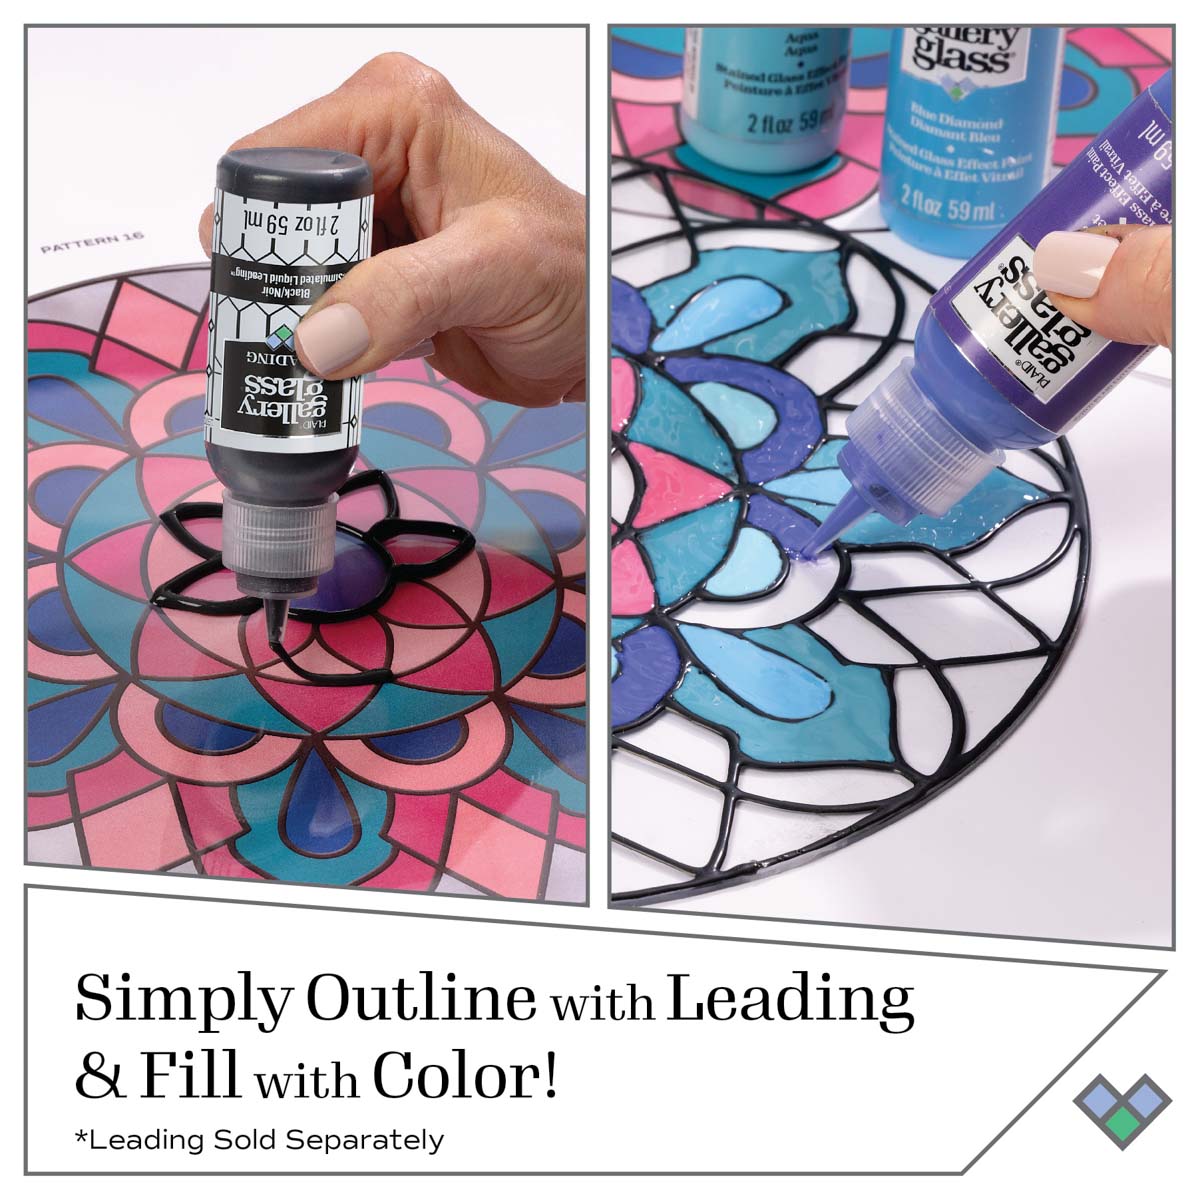 Gallery Glass ® Stained Glass Effect Paint - Crystal Clear, 2 oz. - 19693